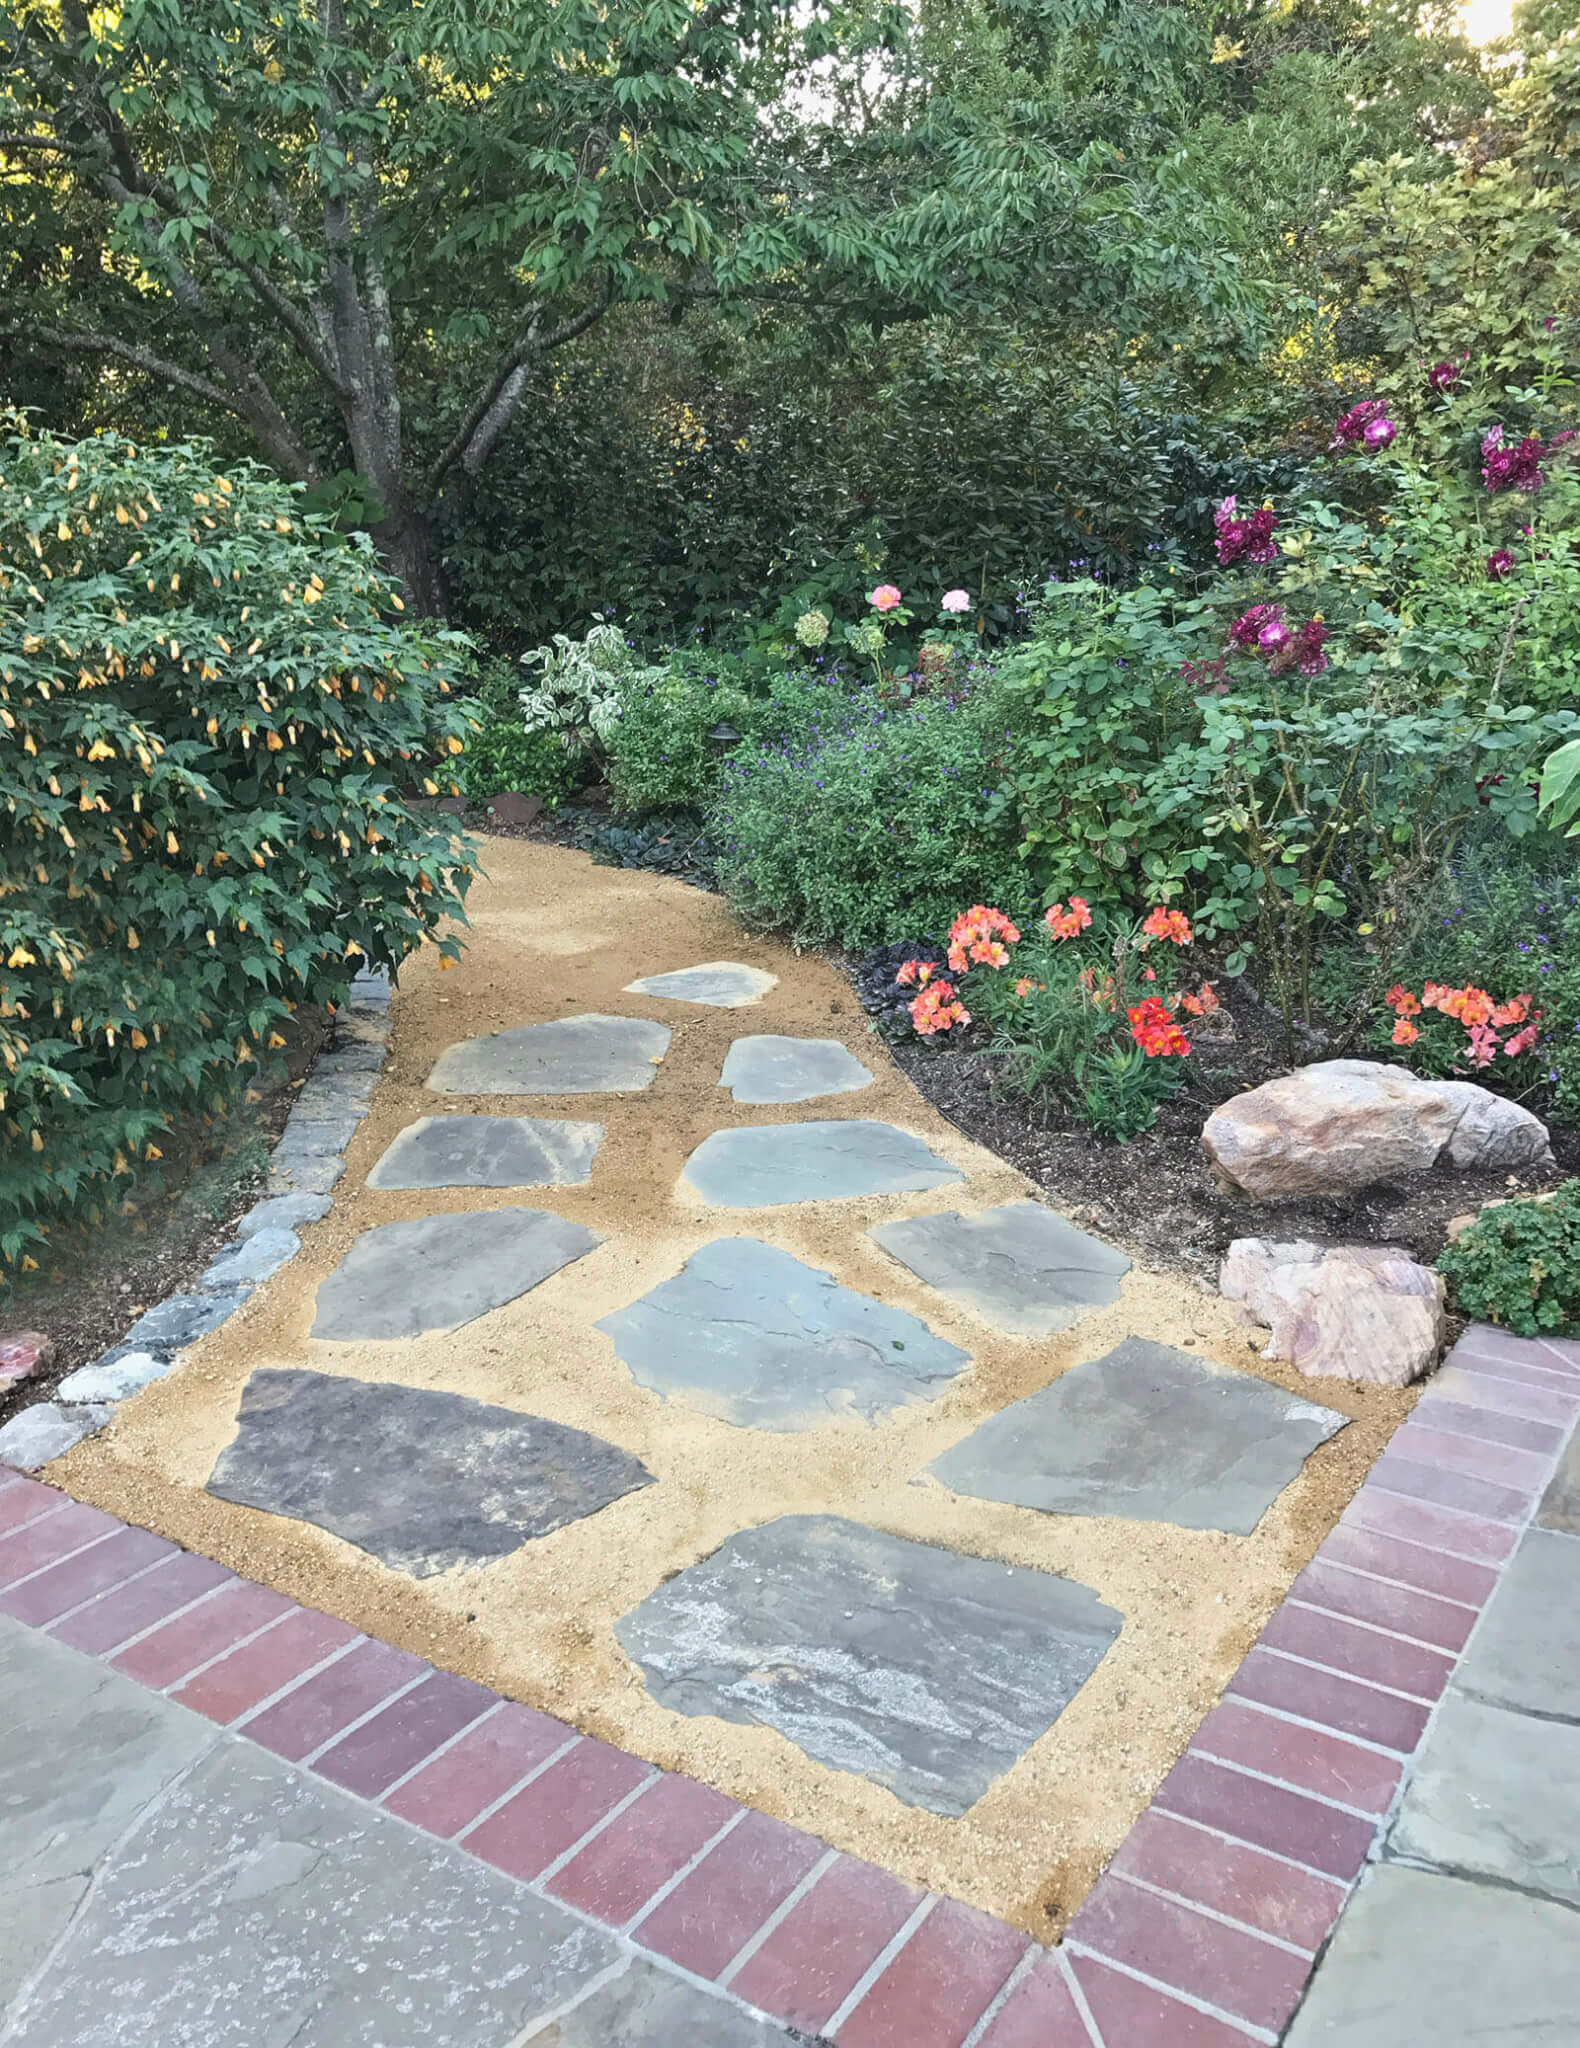 Sand and gravel walkway with laid stone leading to brick-lined stone tile patio